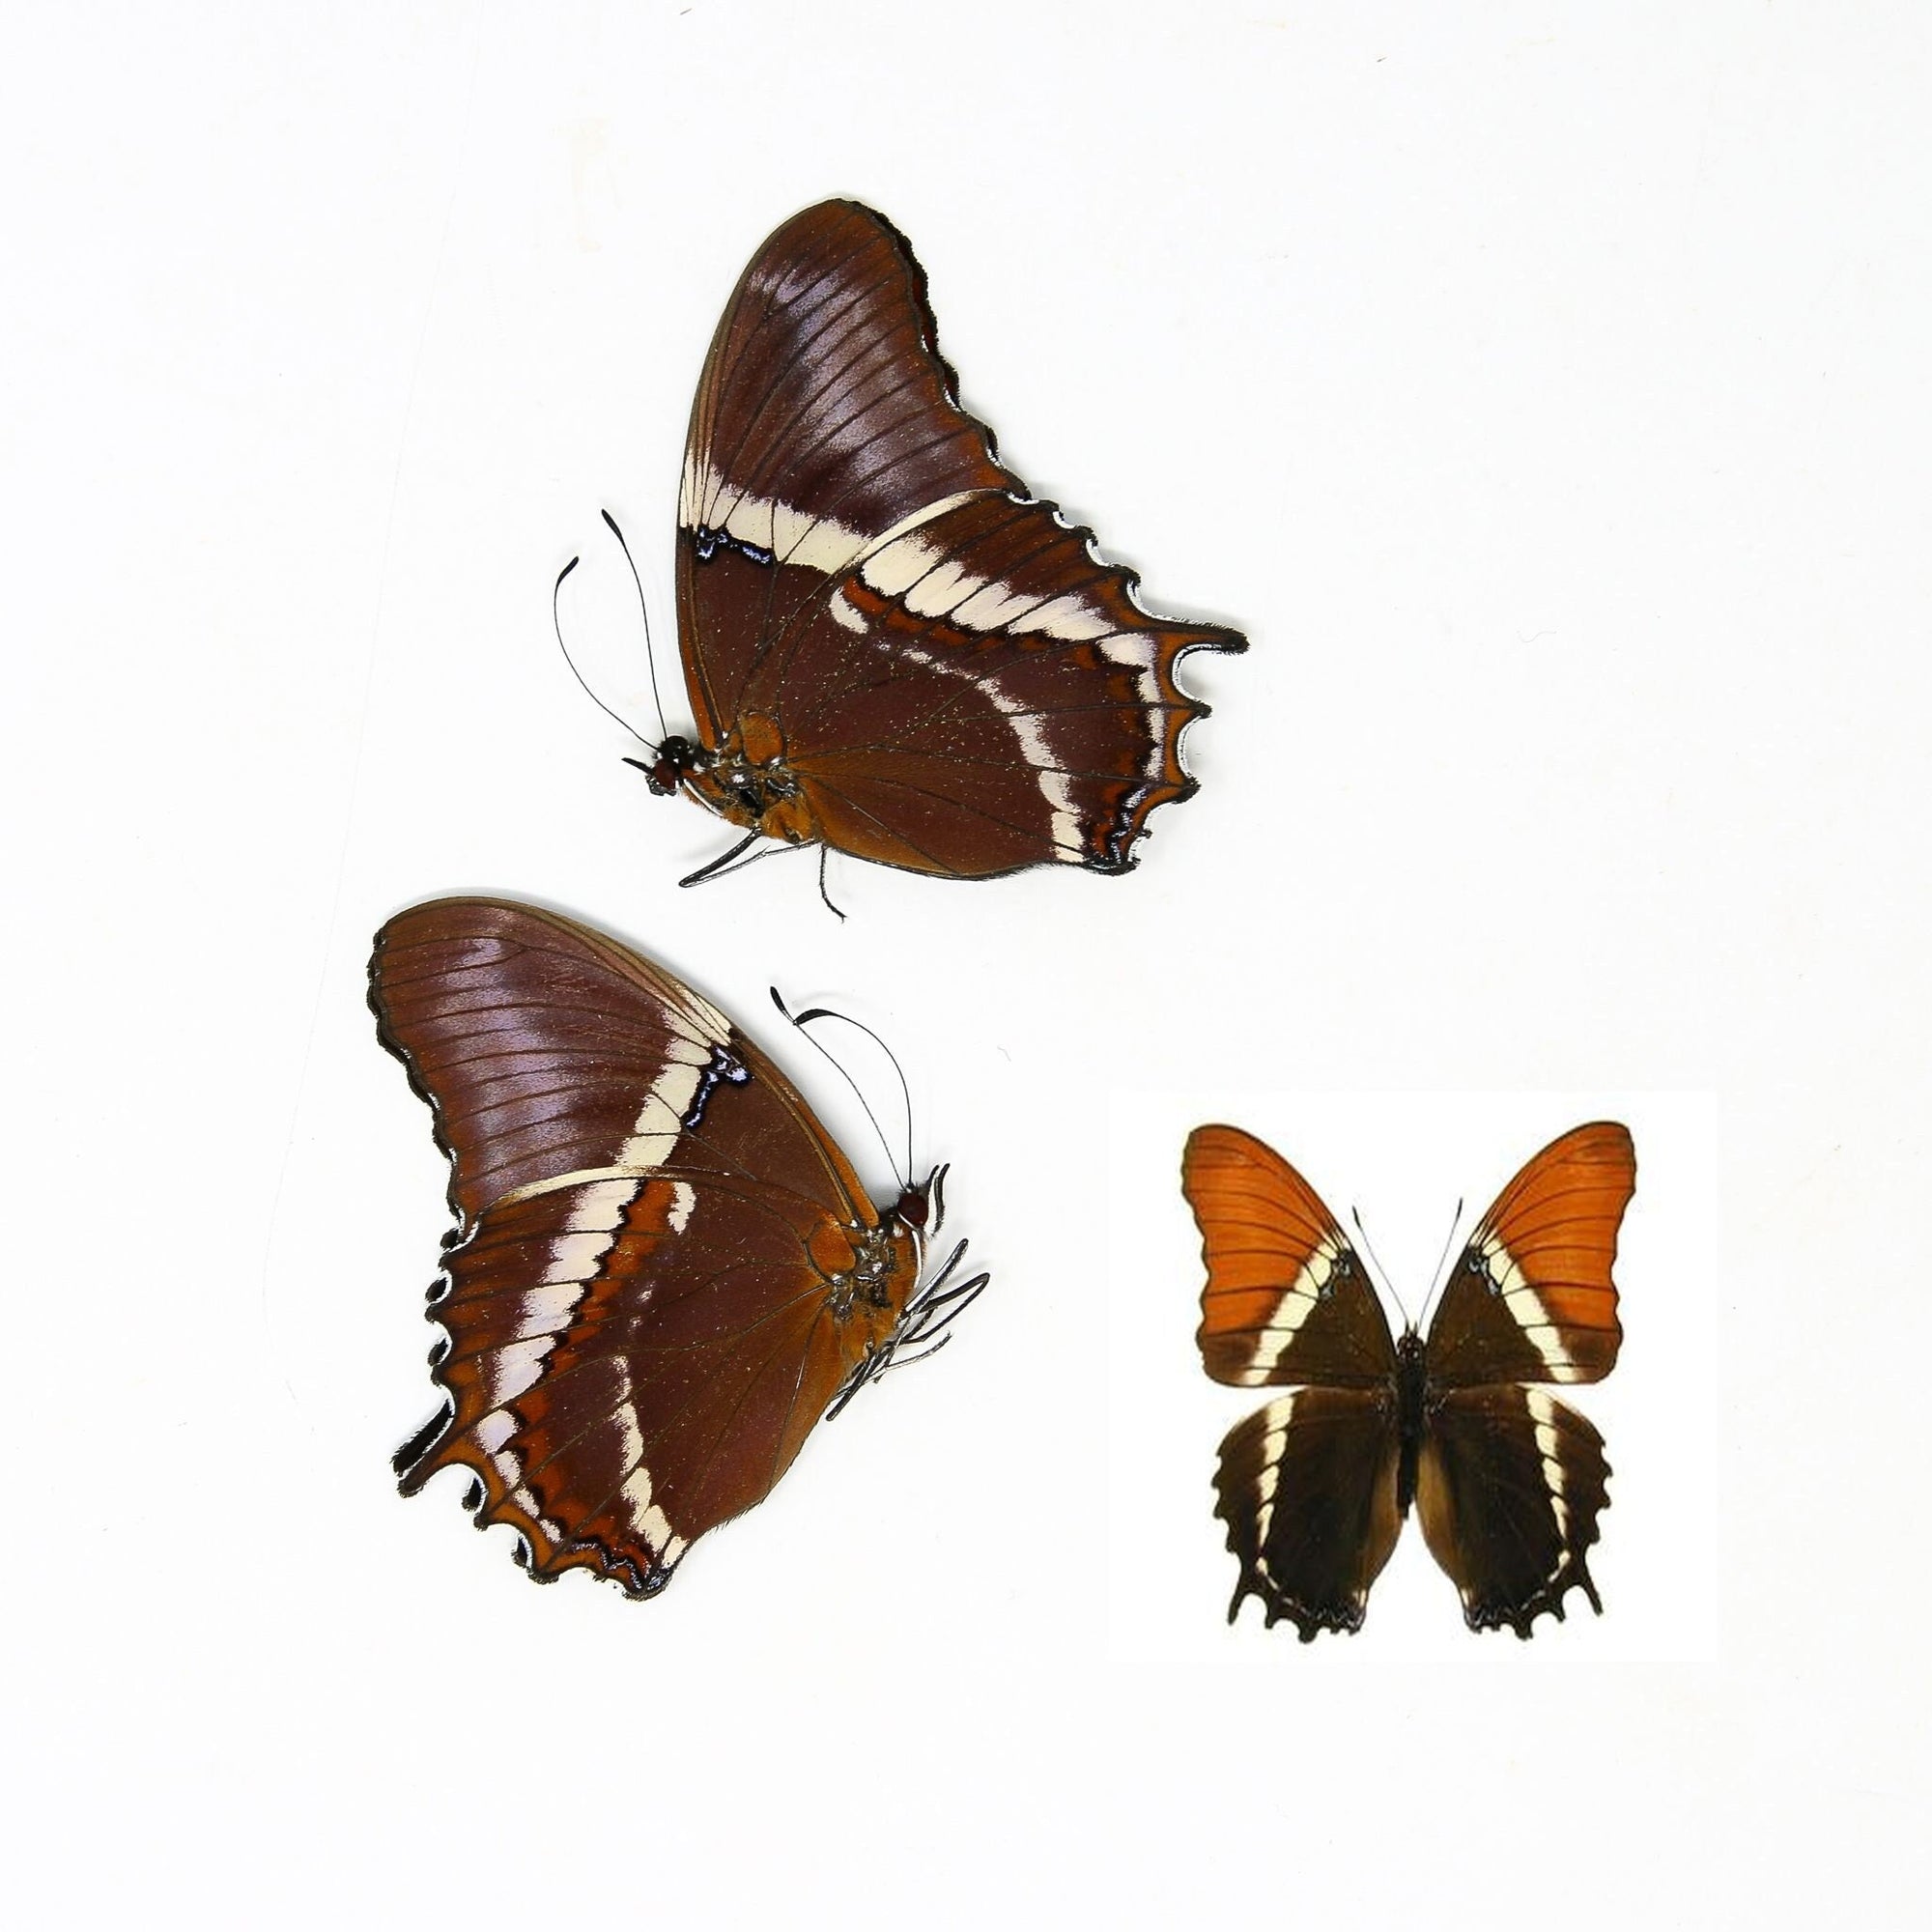 Two (2) Siproeta epaphus, "Rusty-Tipped Page" A1 Real Dry-Preserved Butterflies, Unmounted Entomology Taxidermy Specimens